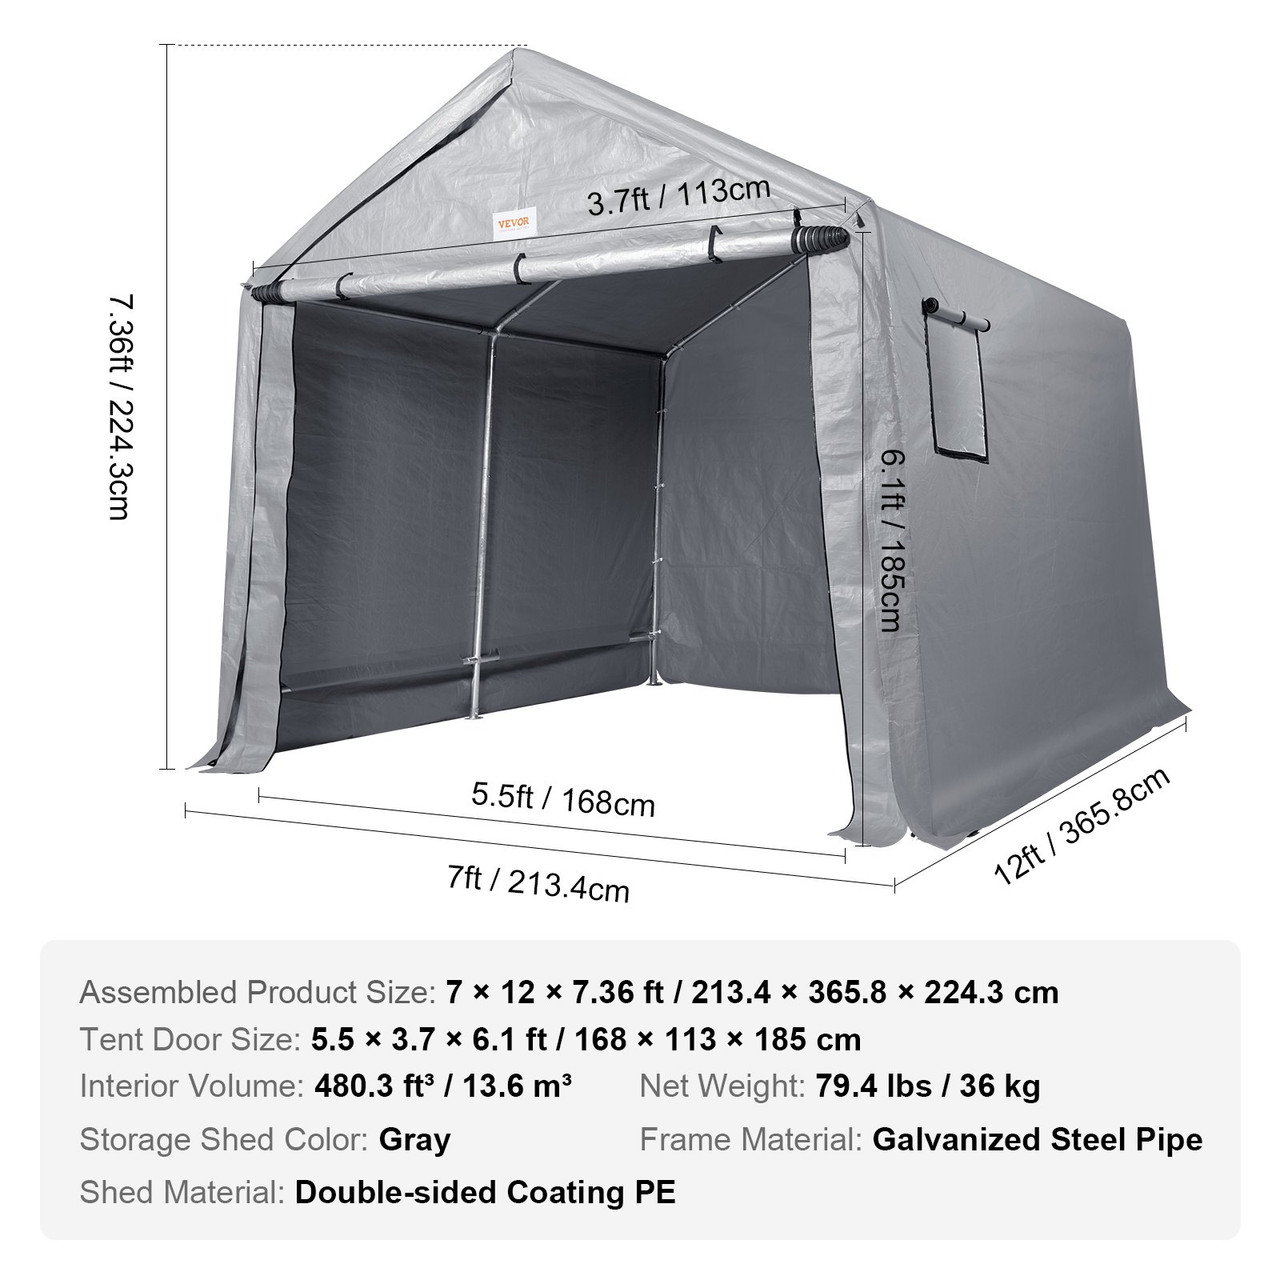 Portable Shed Outdoor Storage Shelter, 7 x 12 x 7.36 ft Heavy Duty All-Season Instant Storage Tent Tarp Sheds with Roll-up Zipper Door and Ventilated Windows For Motorcycle, Bike, Garden Tools